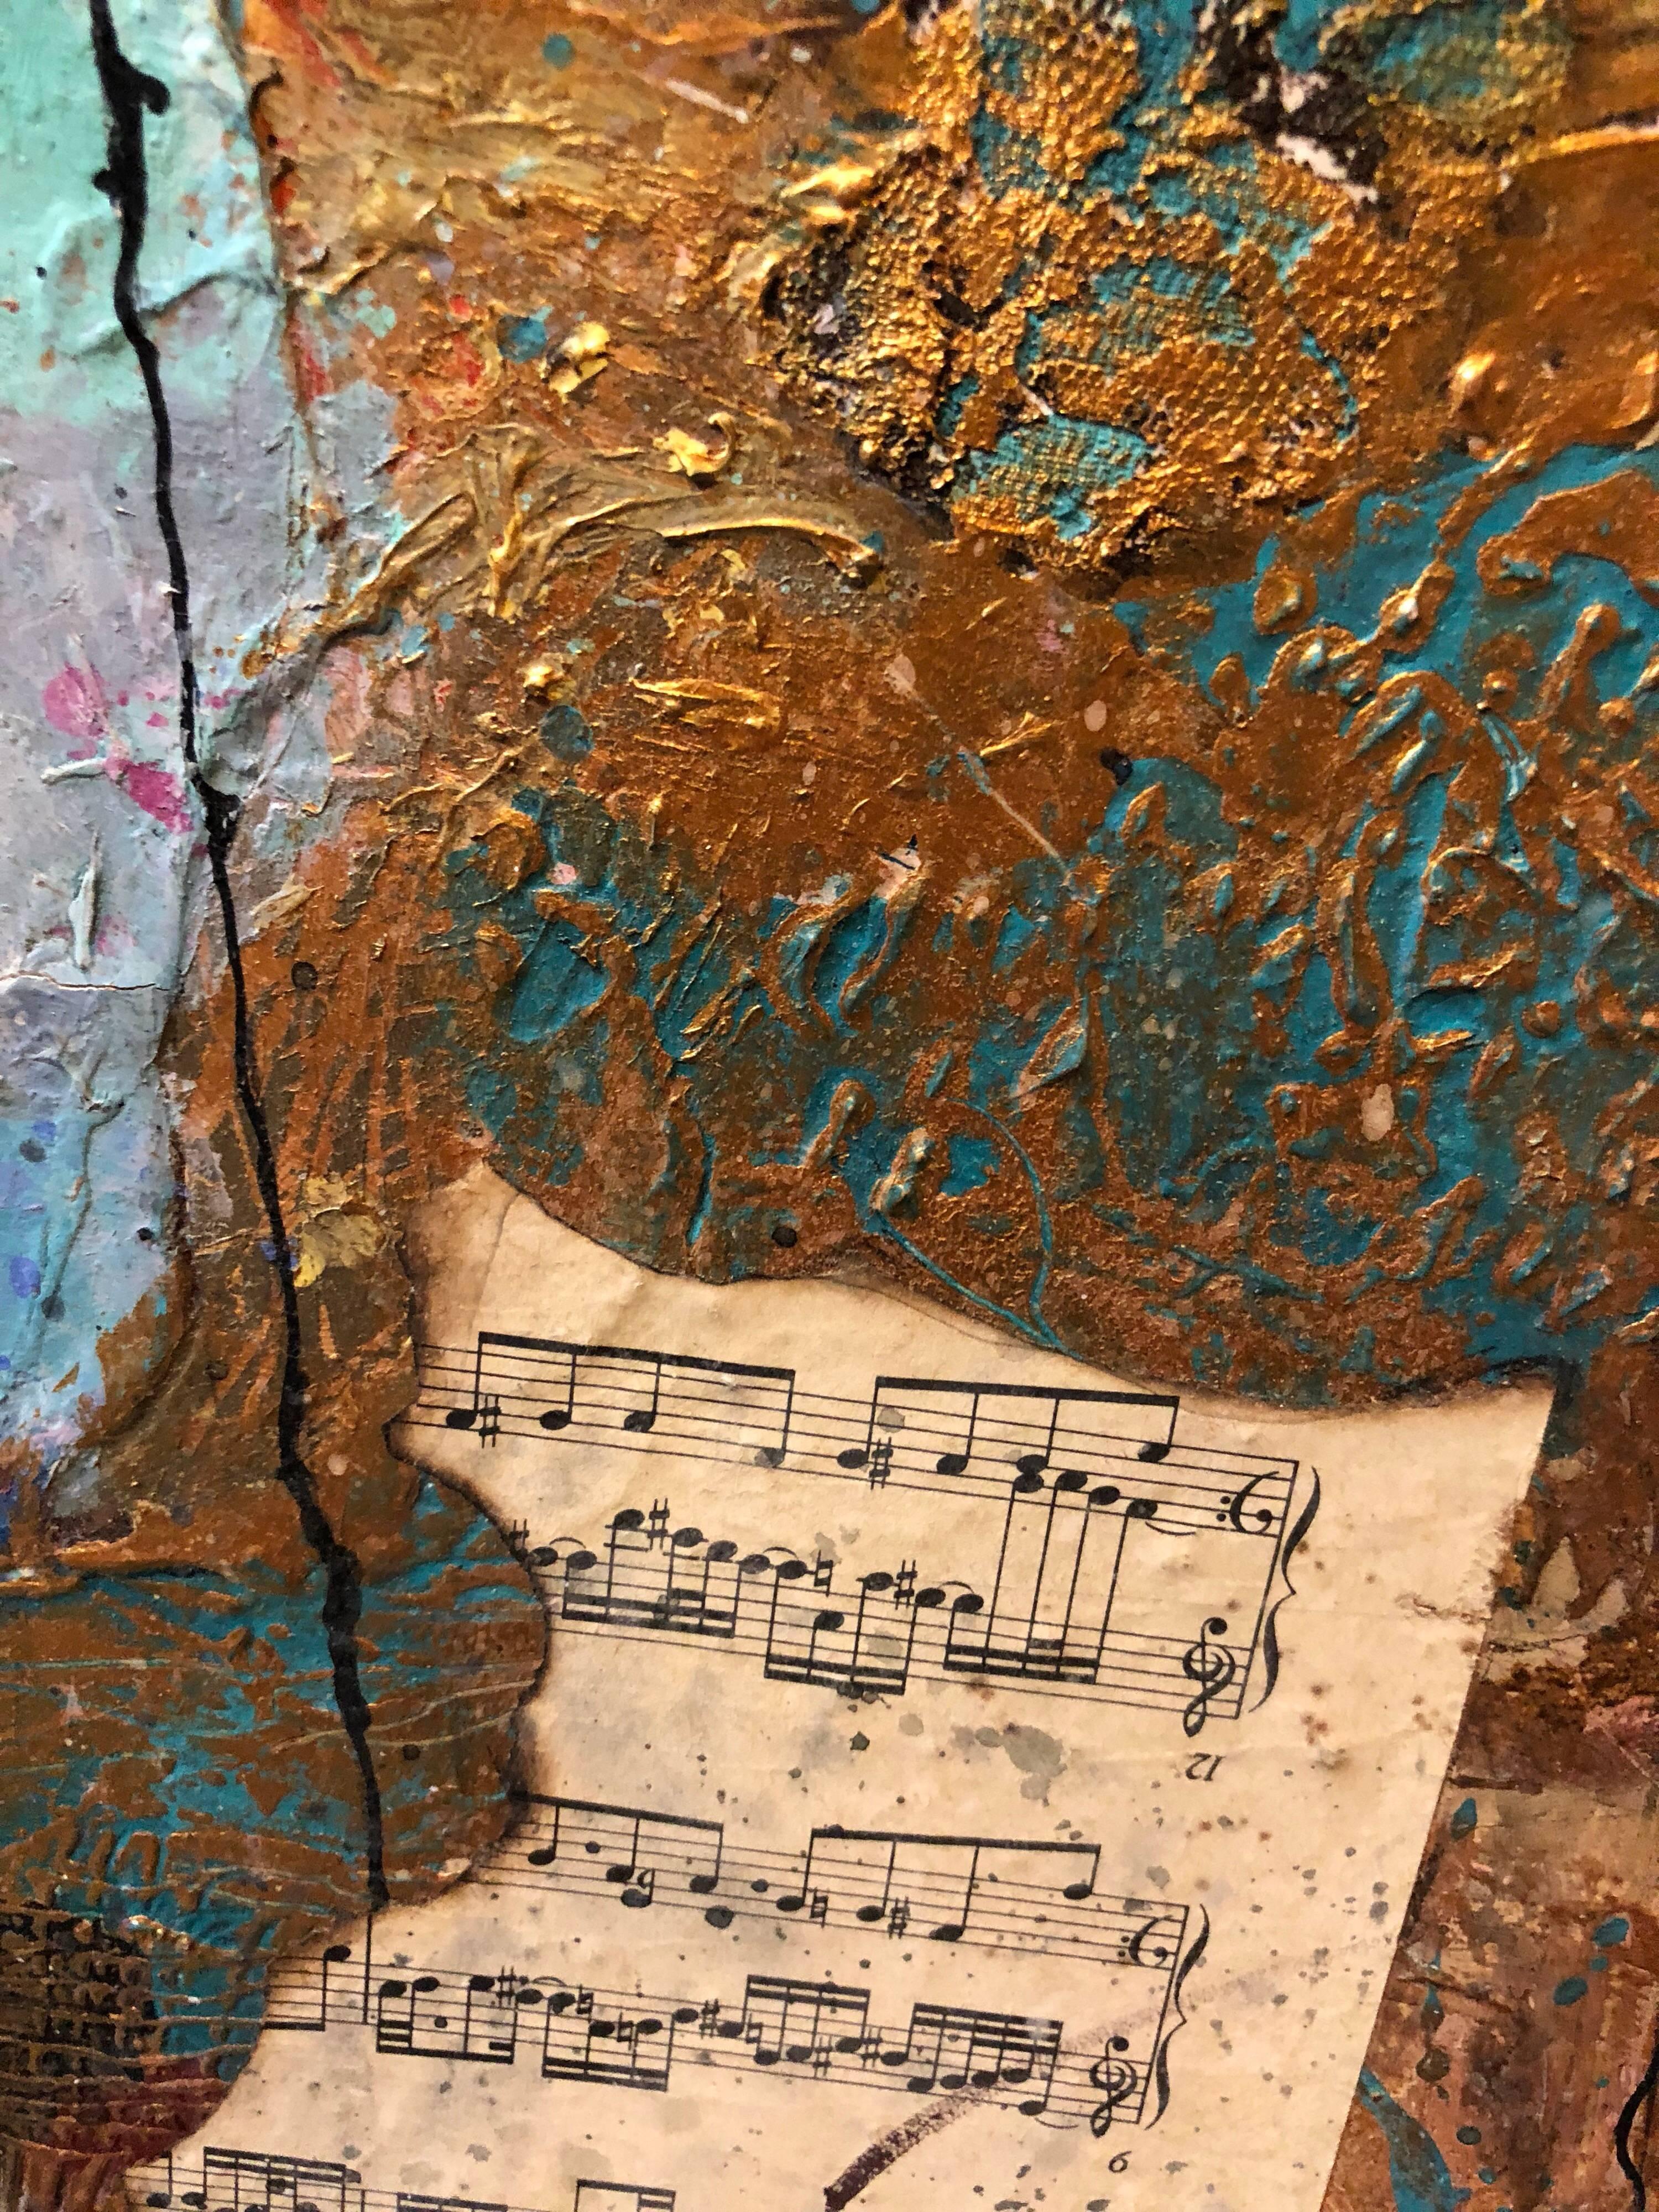 37.75 X 27.5 sight size. it does not appear to be signed. perhaps under frame. it is an original painting. In this artwork the artist incorporates different materials, creating layers of paint, music compositions cut-outs and a group of figures